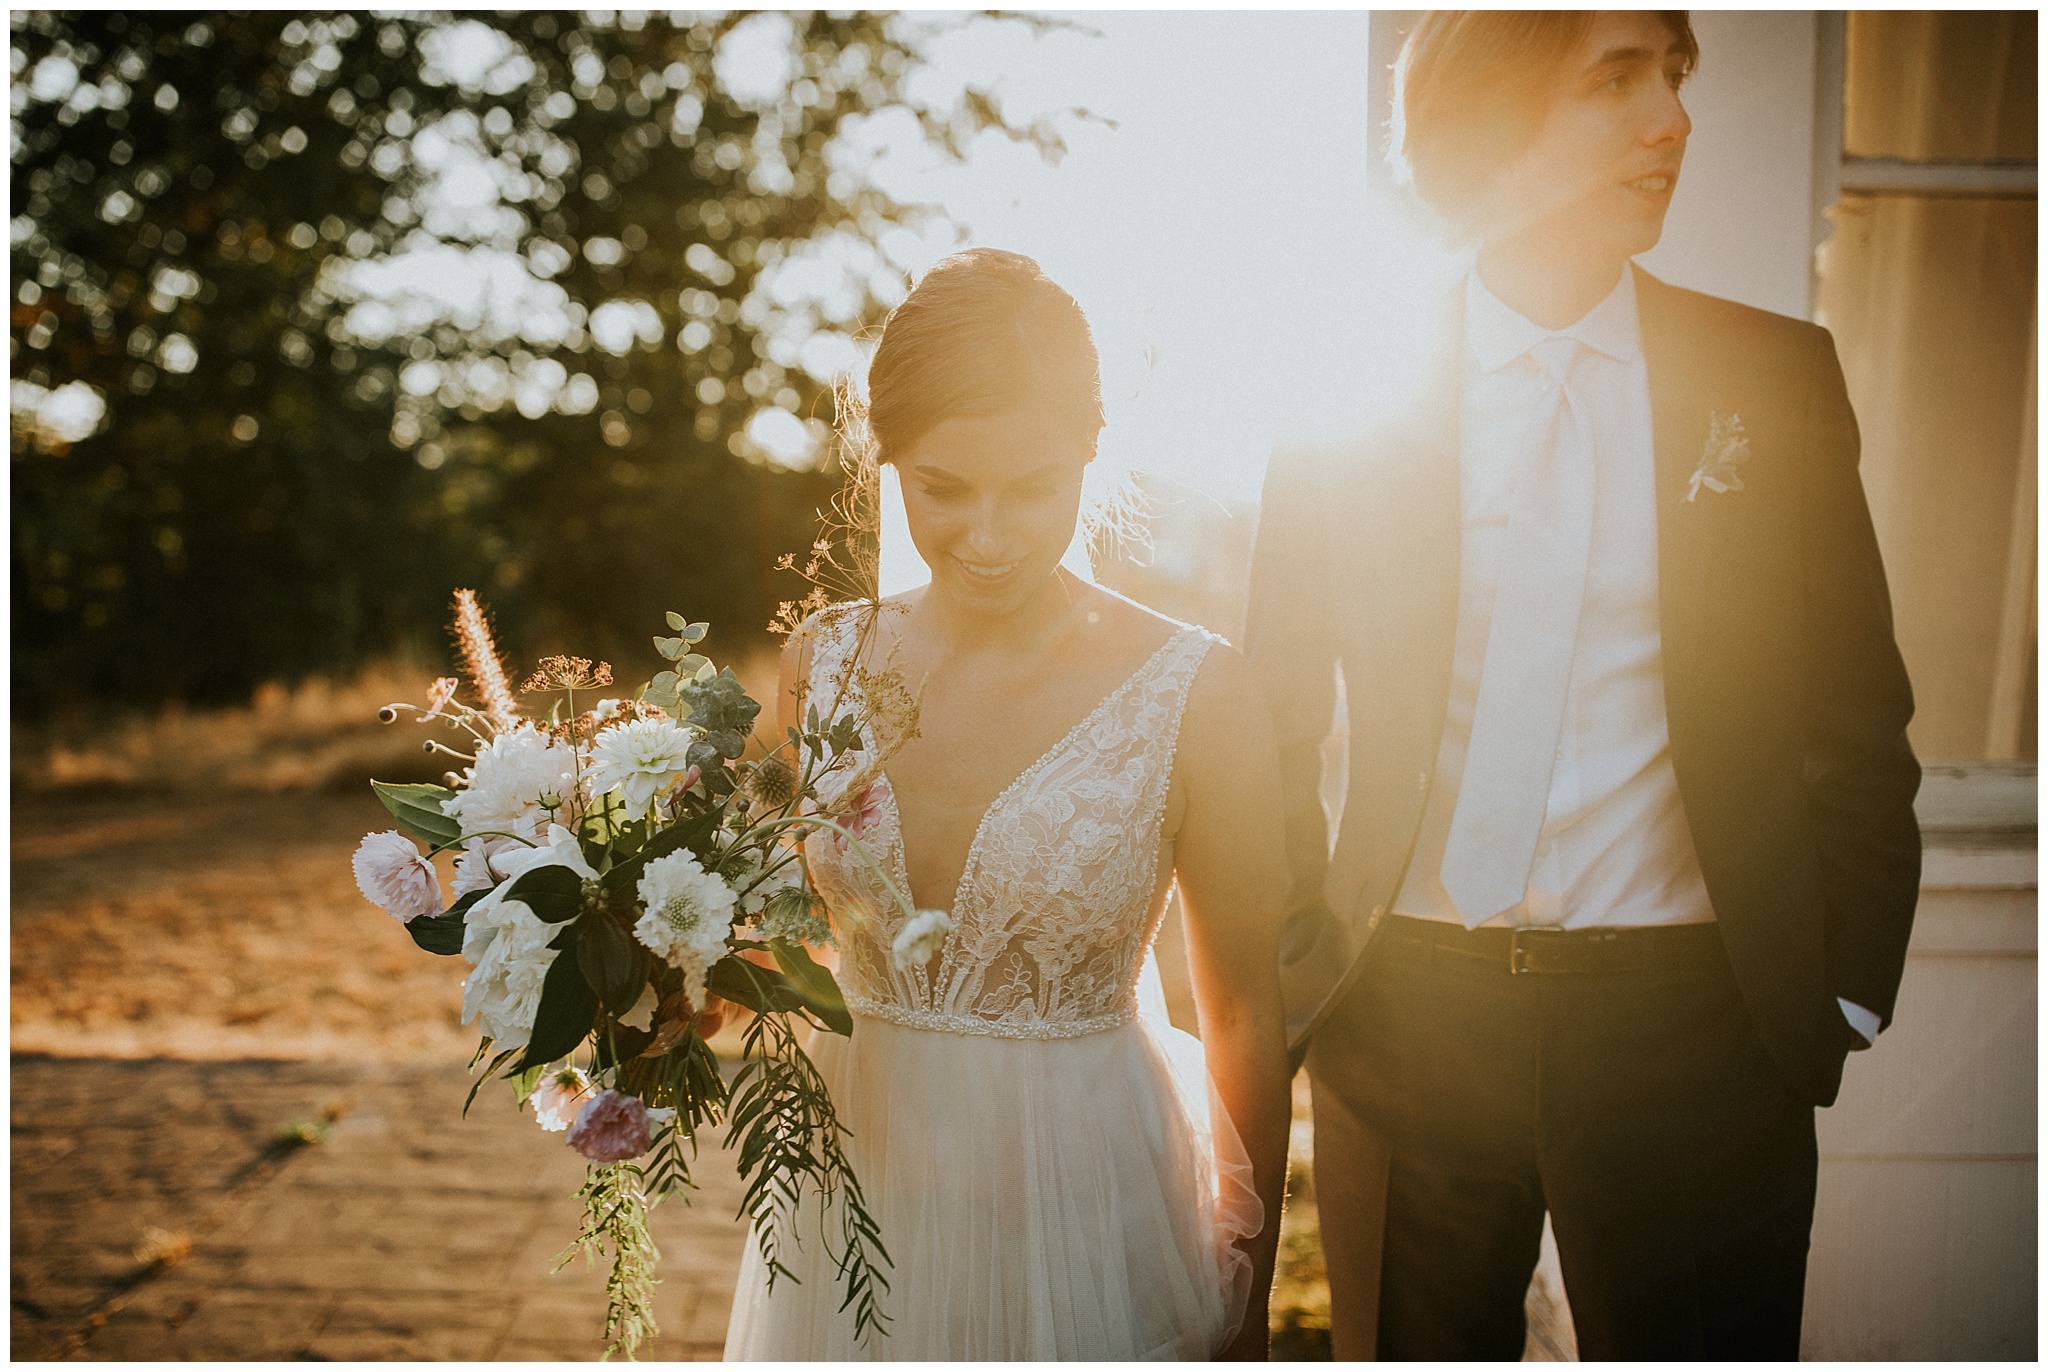 A golden hour wedding portrait by the farm house at Estate 248